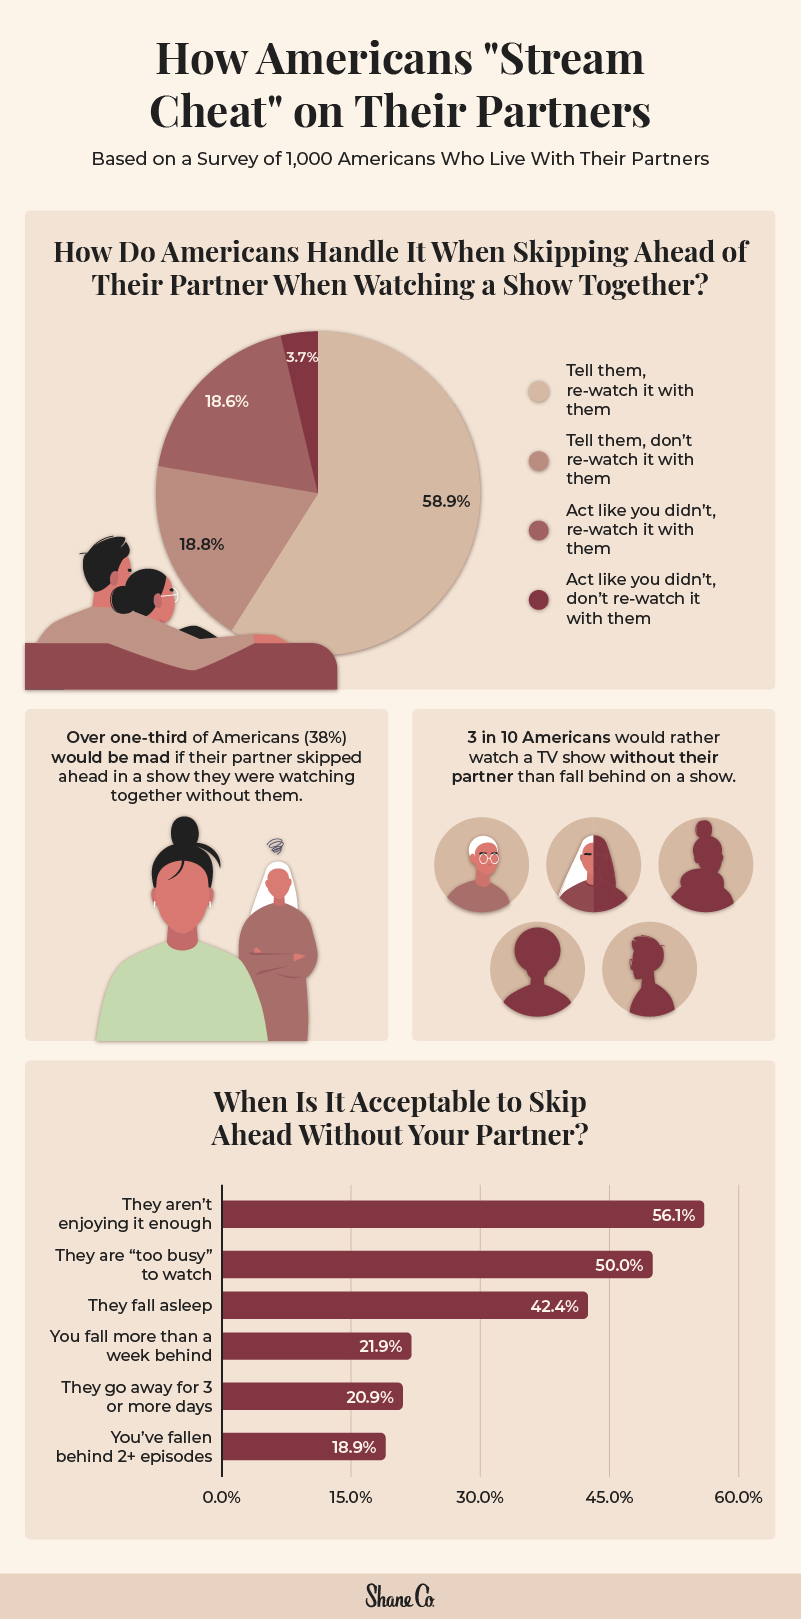 A graphic showing when and how Americans “stream cheat” on their partners